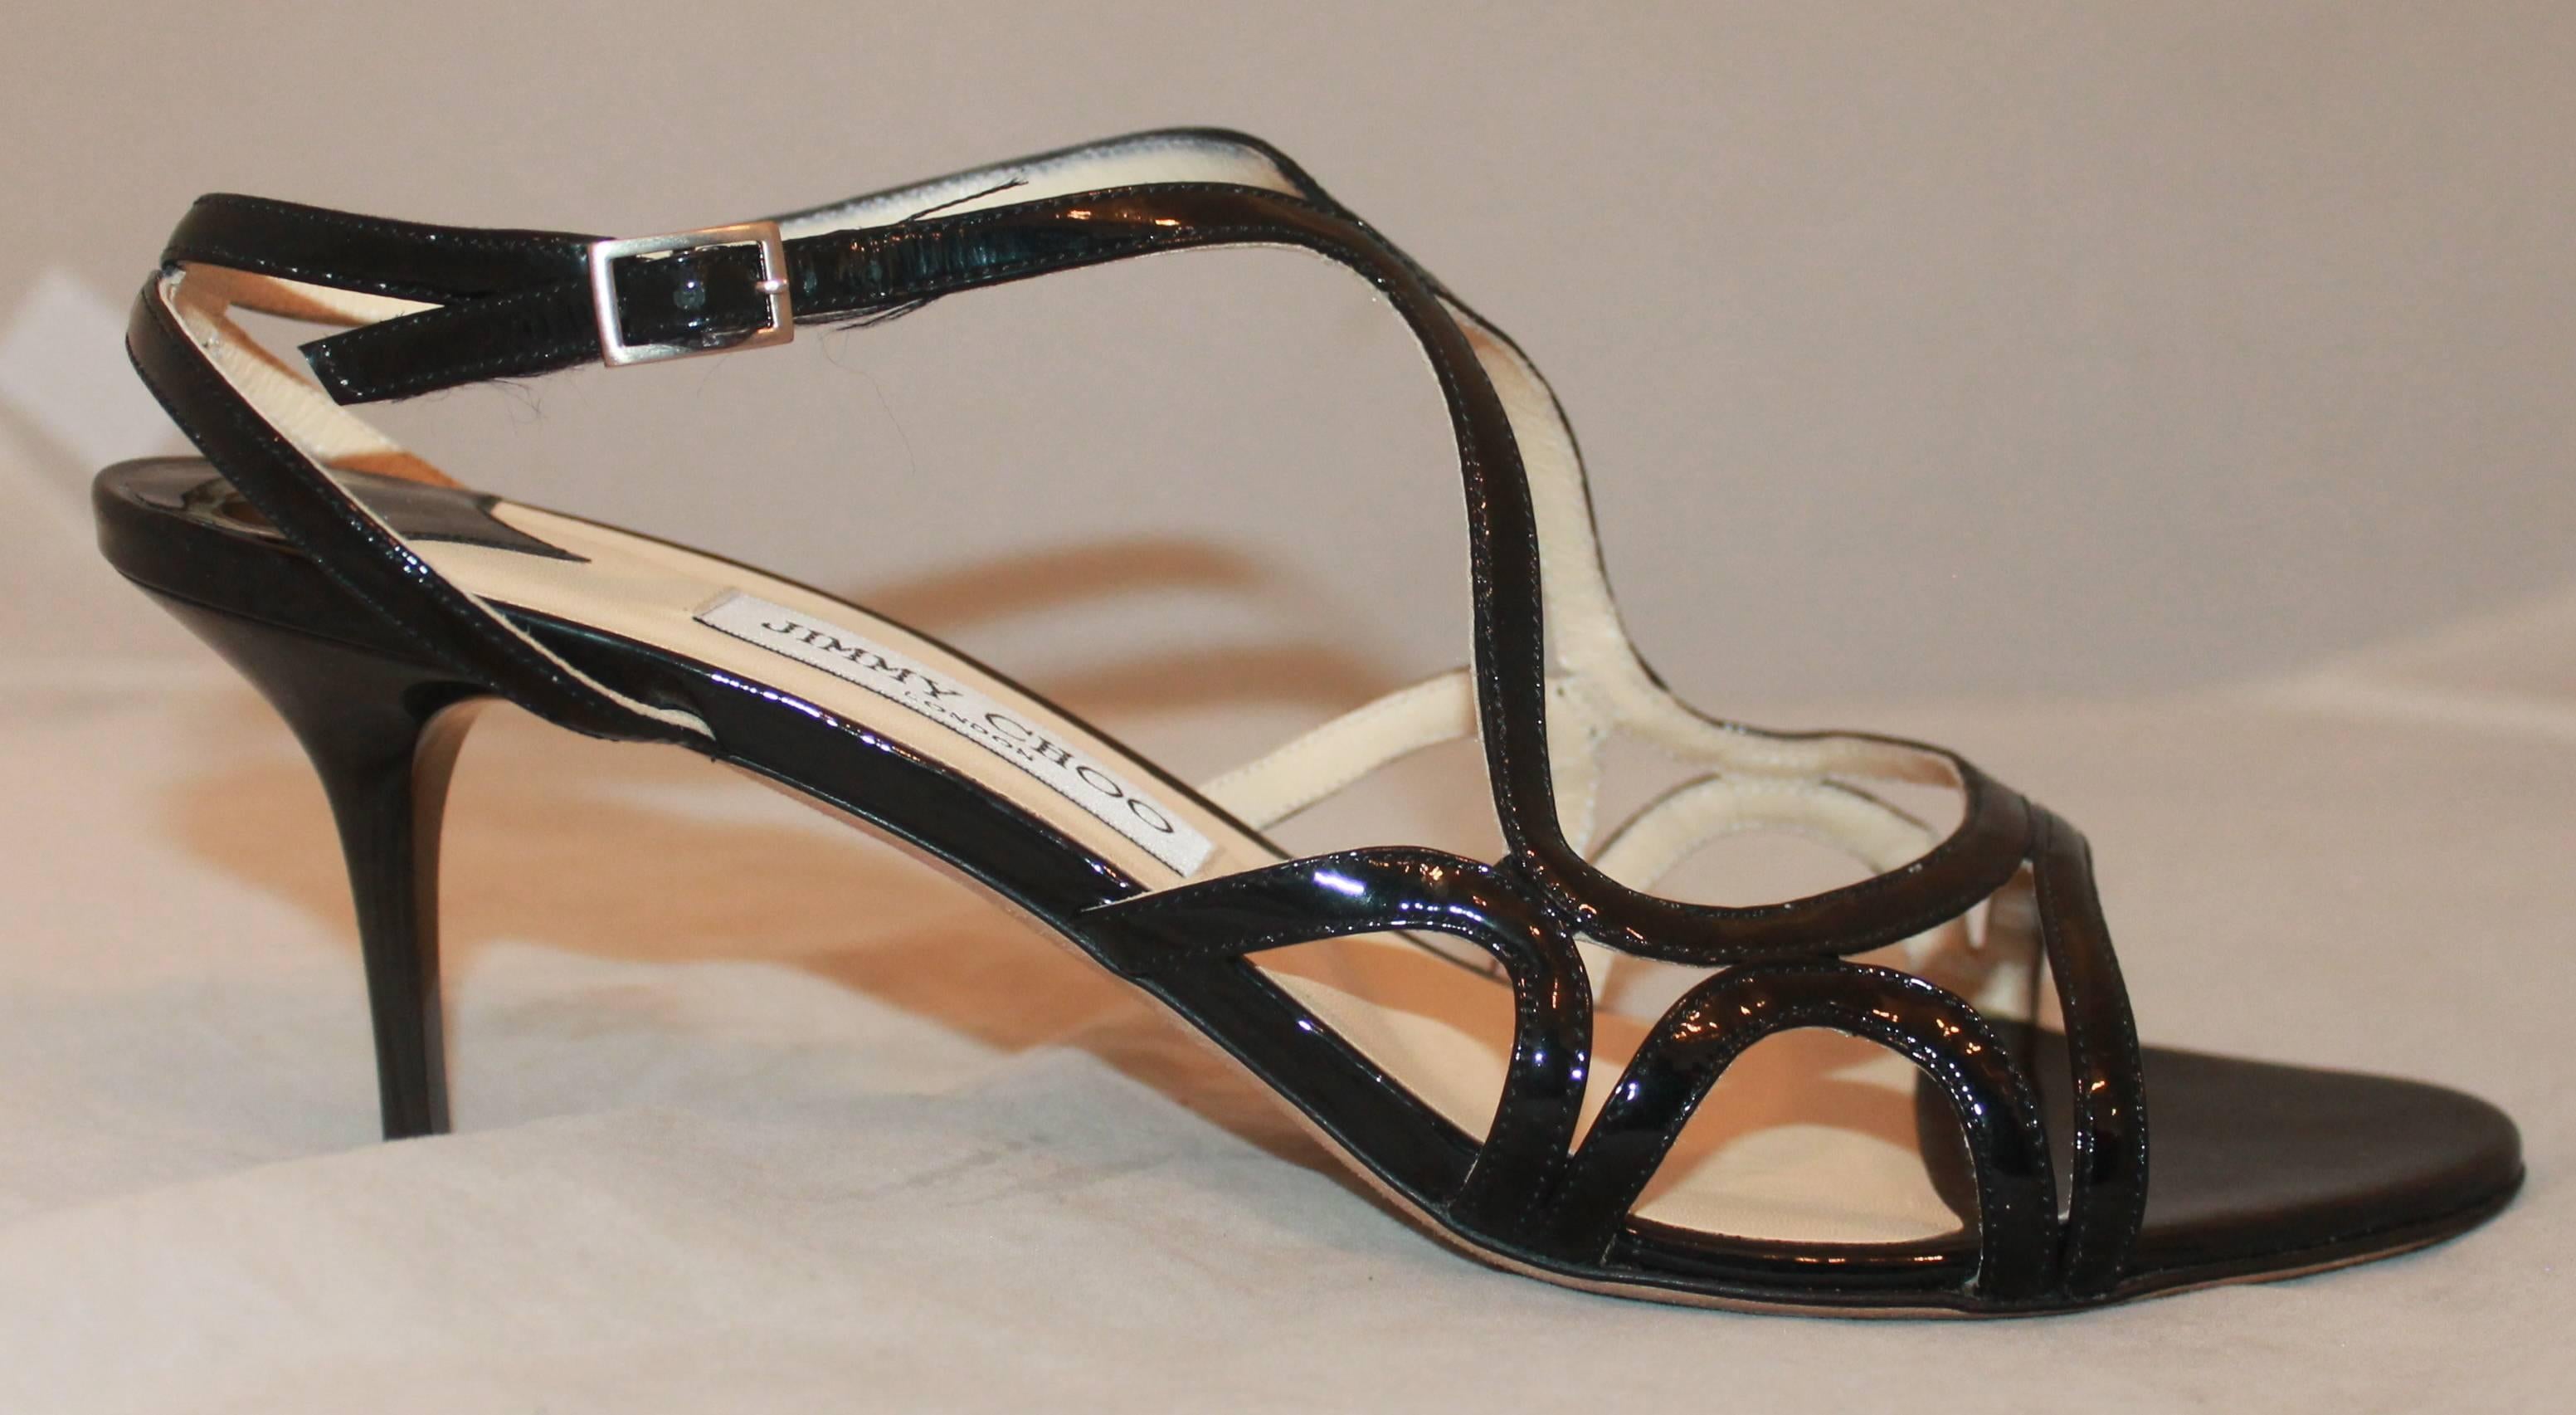 Jimmy Choo Black Patent Strappy Sandal Heels - 40.  These adorable Jimmy Choo heels are in excellent condition with only minimal wear to the sole.  They feature a simple, but feminine black patent leather, and a strappy appearance with a double